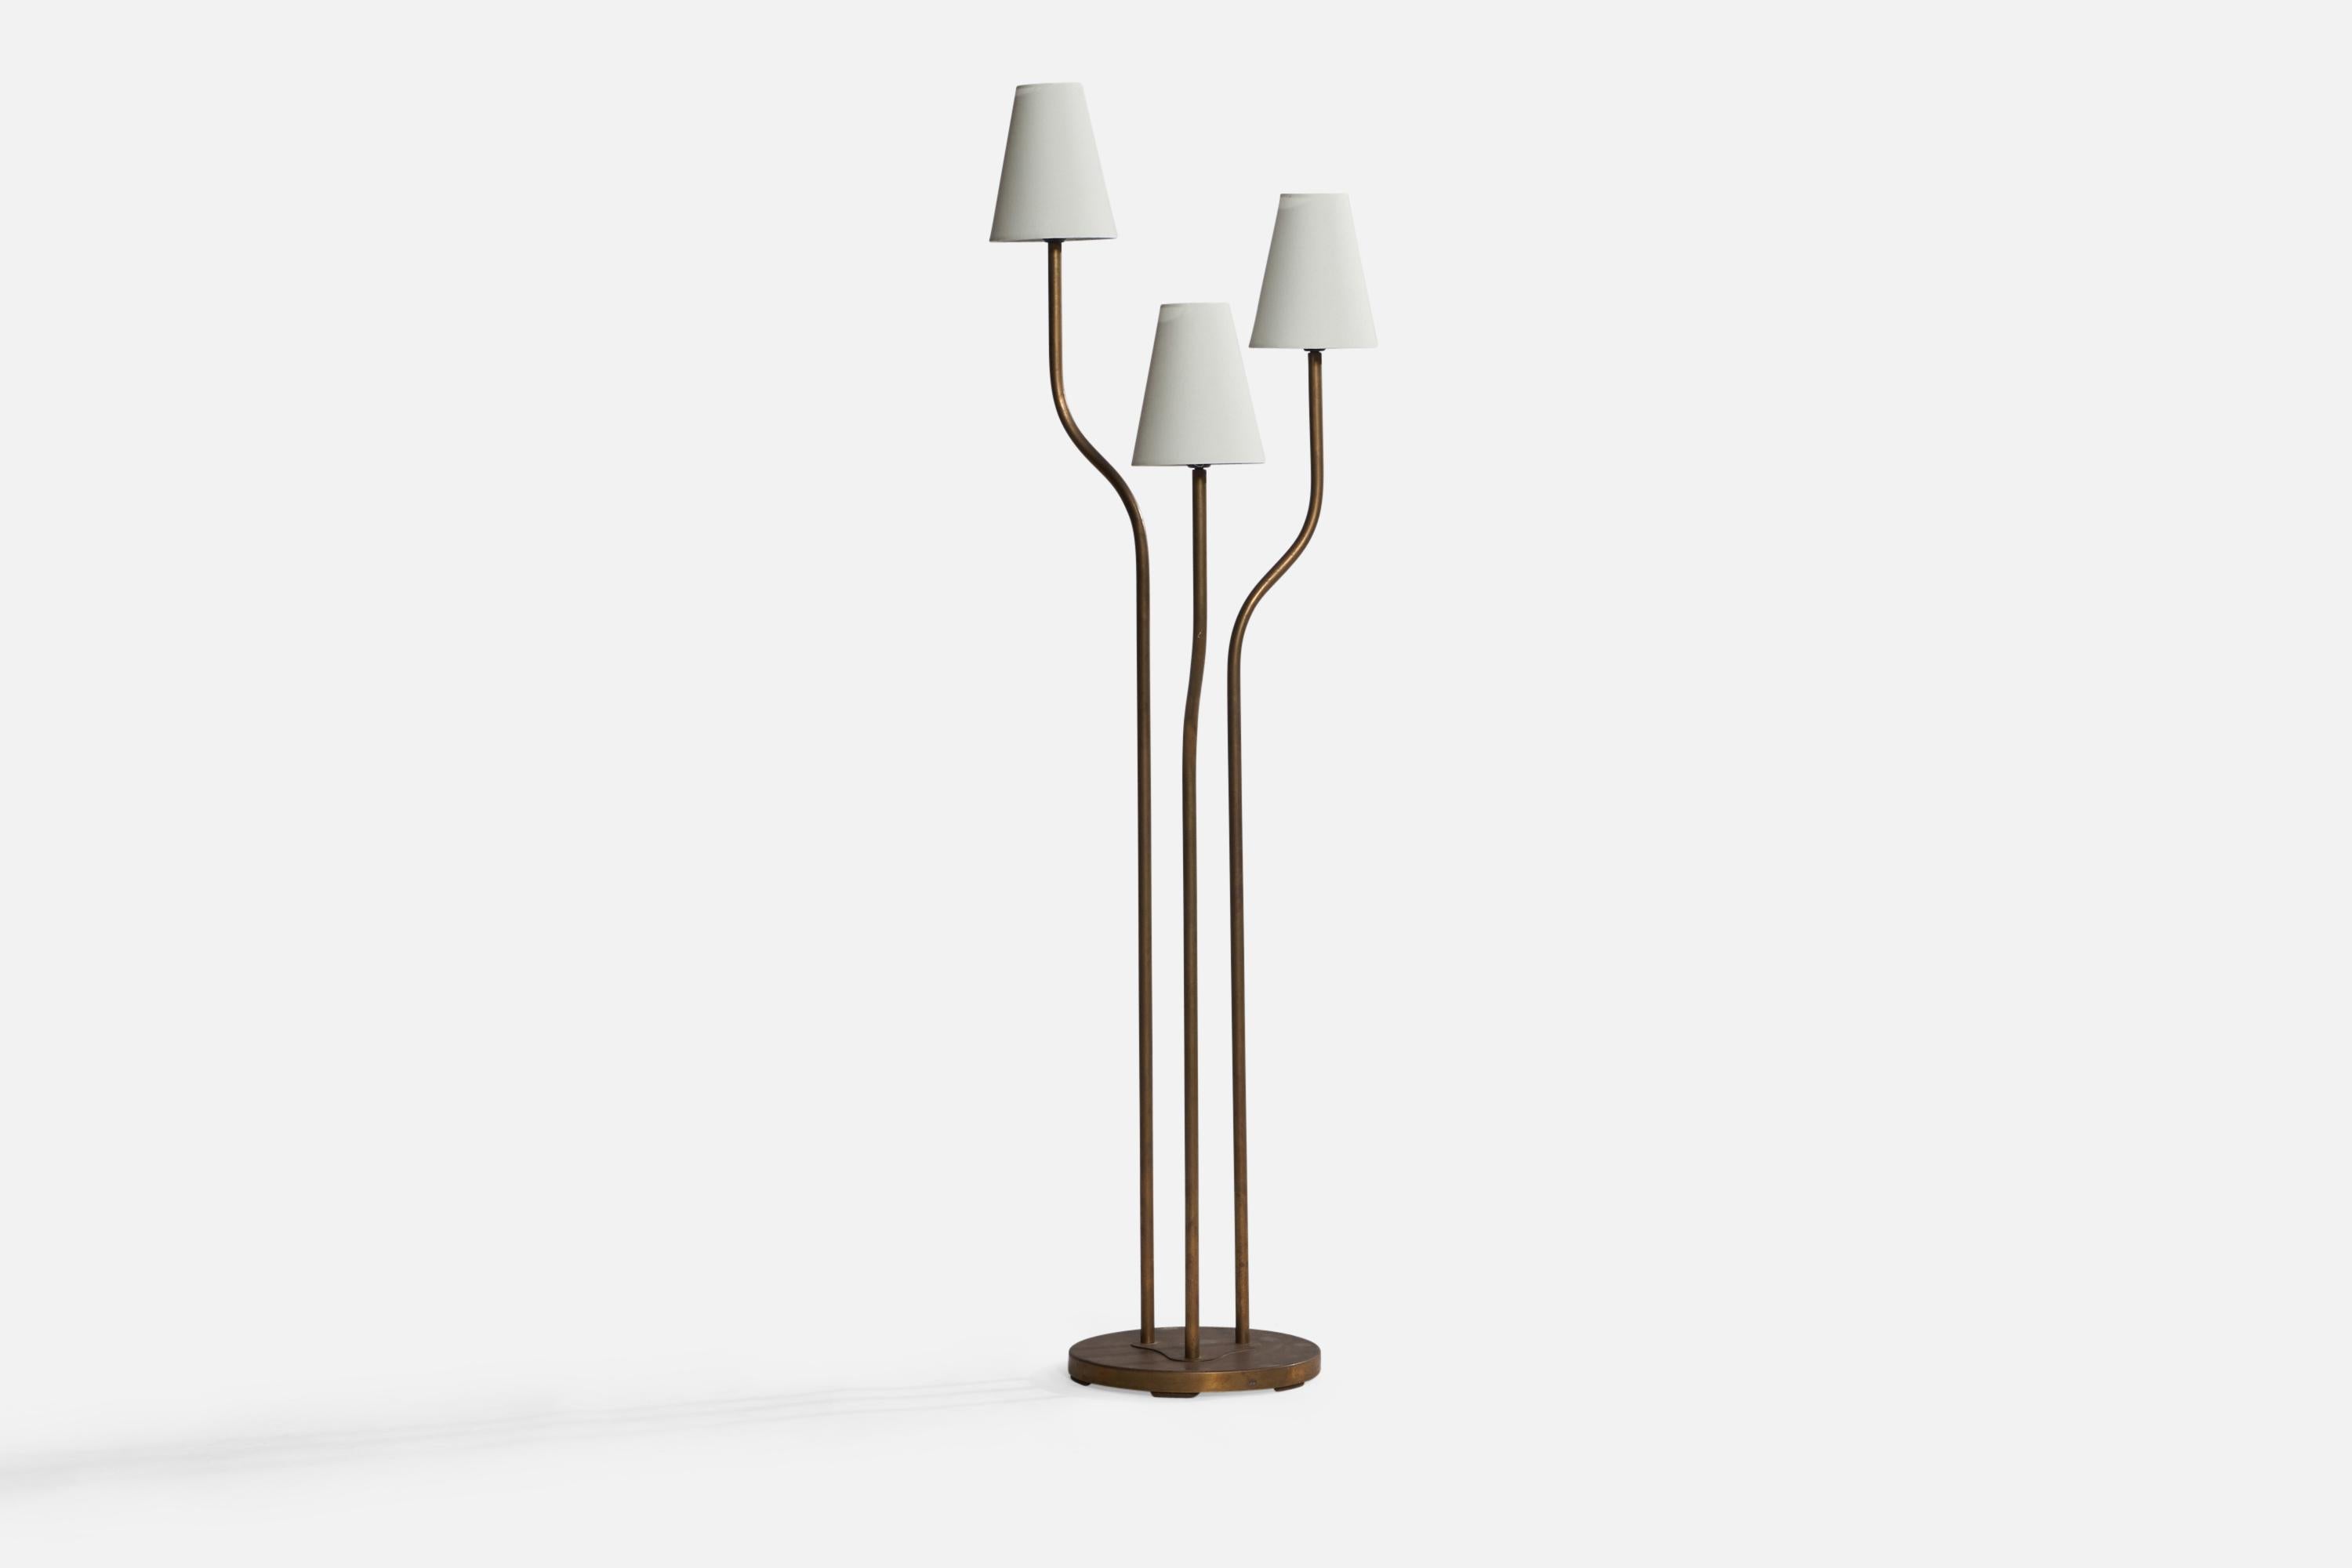 A three-armed brass and white fabric floor lamp designed and produced in Sweden, c. 1940s.

Overall Dimensions (inches): 55.45” H x 16.35” W x 15.25” D. Stated dimensions include shade.
Bulb Specifications: E-26 Bulbs
Number of Sockets: 3
All